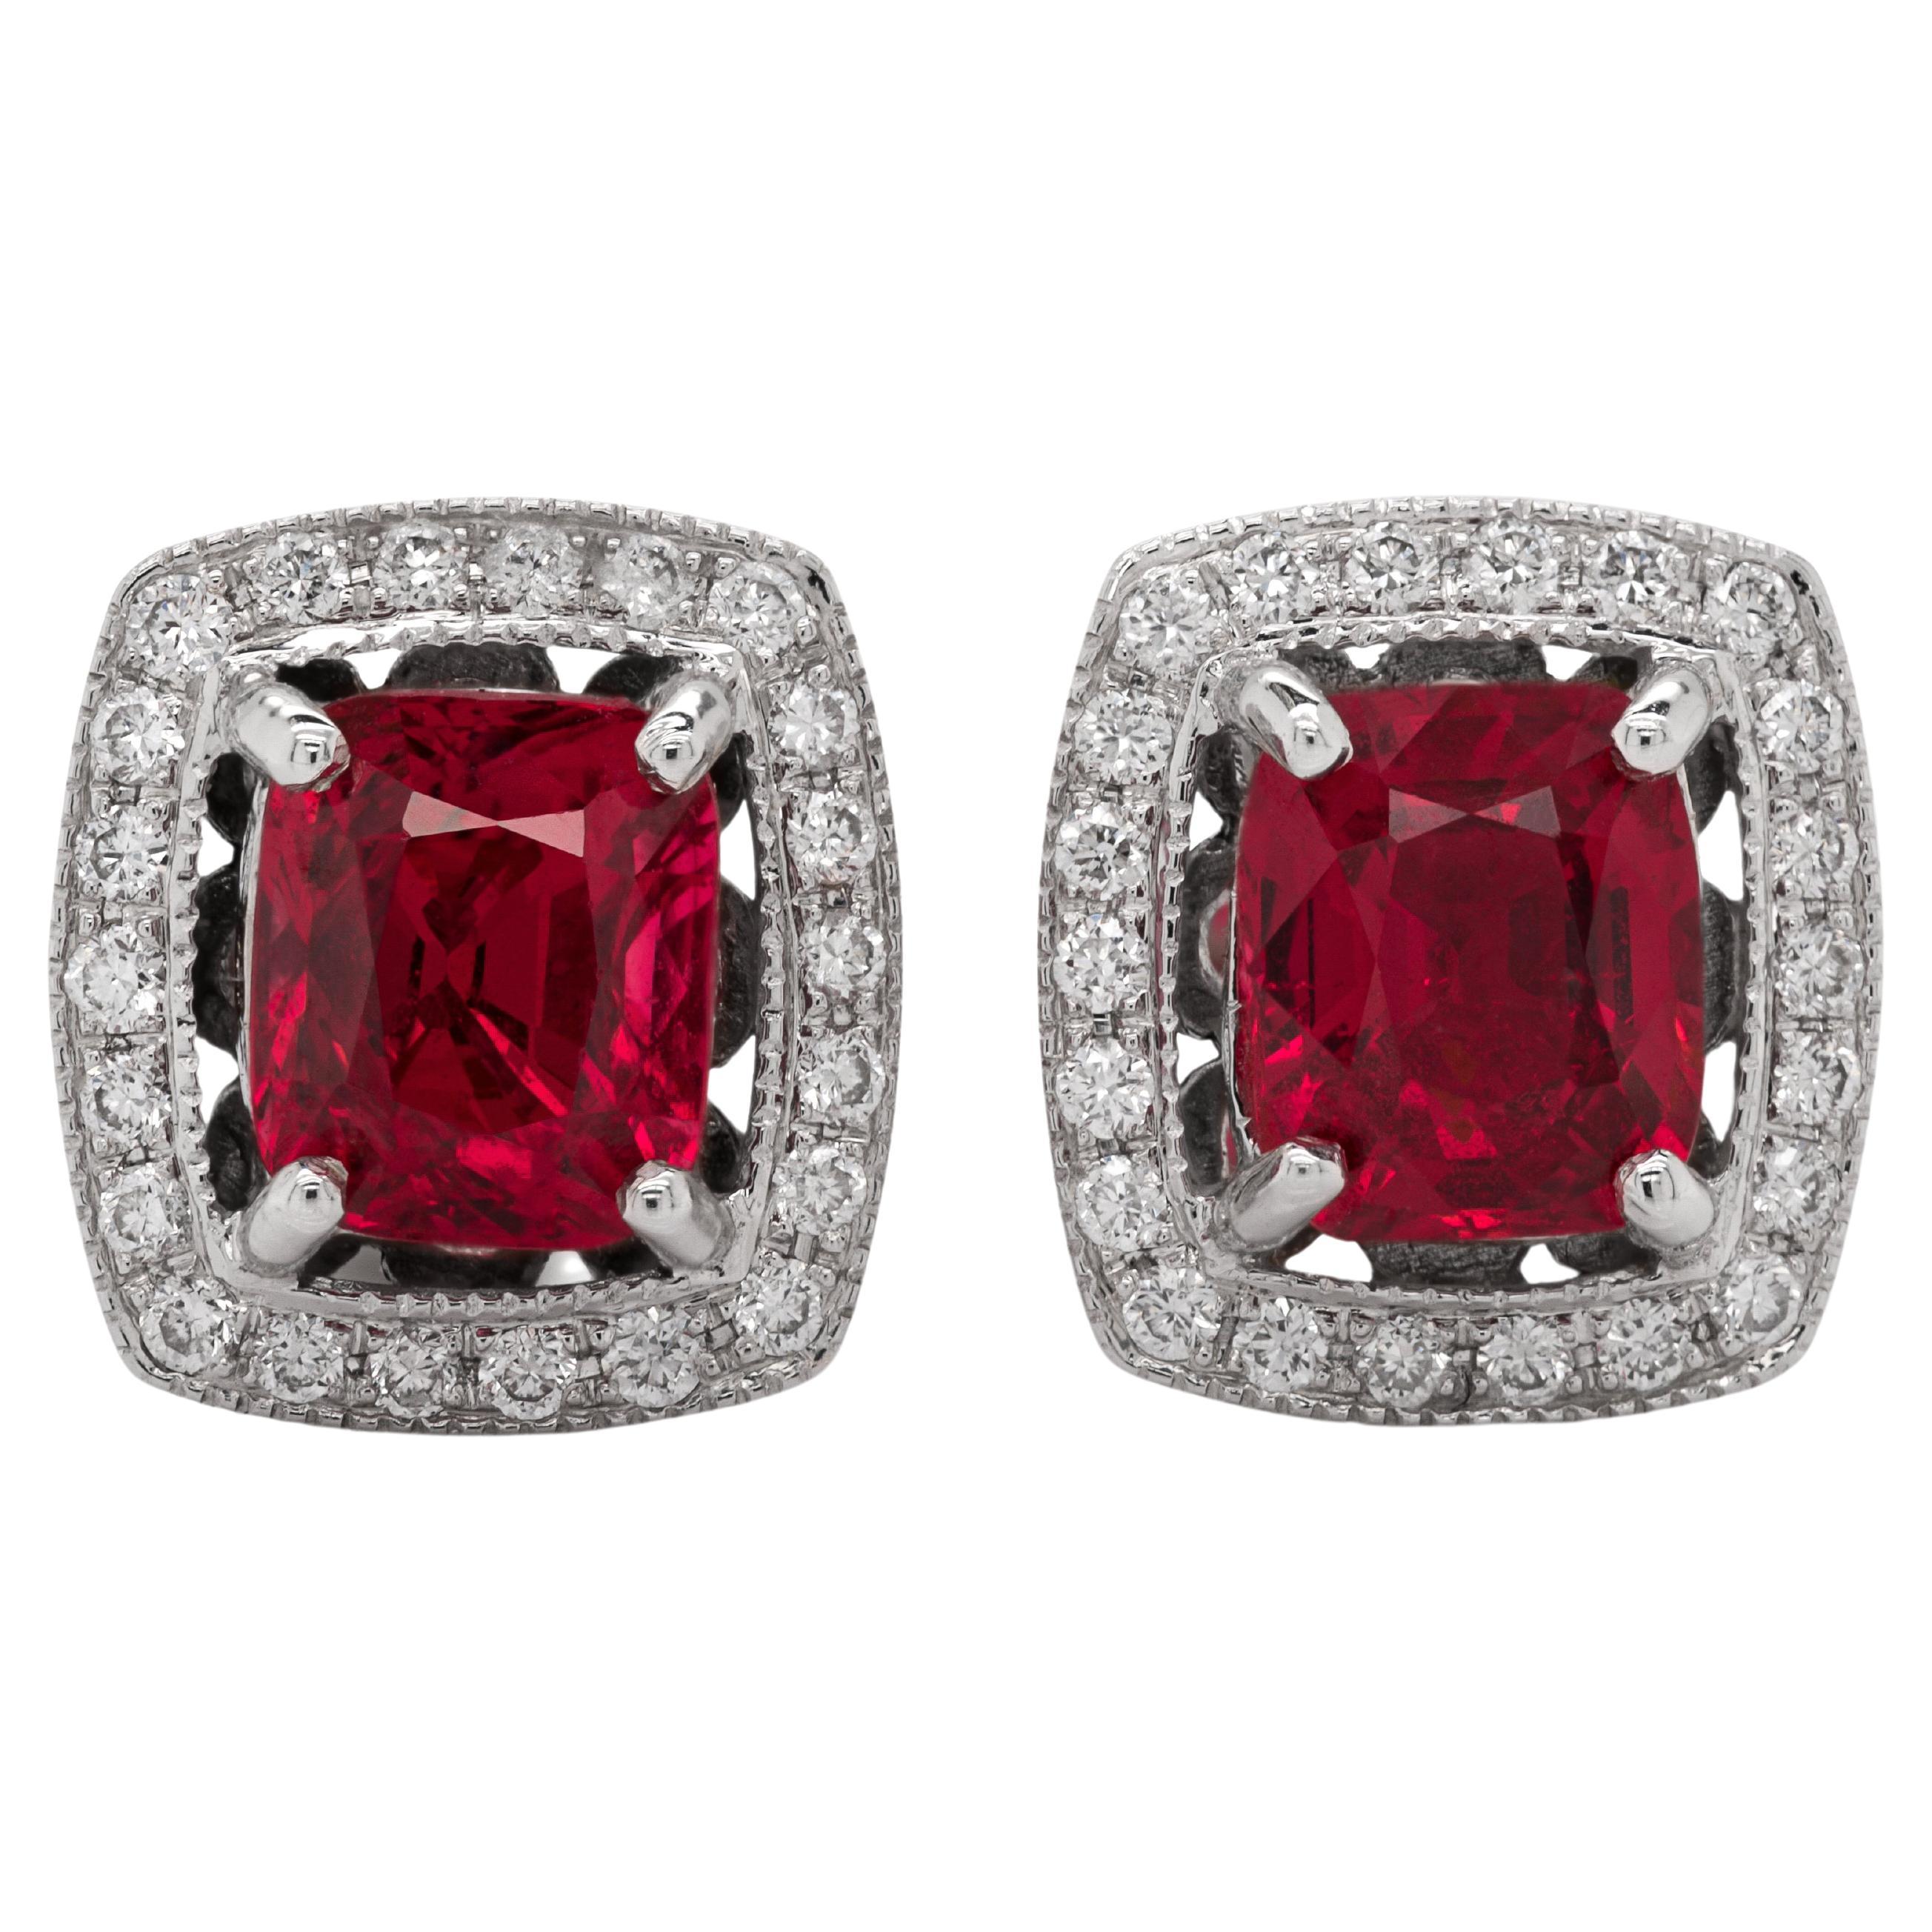 Natural Neon Tanzanian Spinel 1.45 Carats in White Gold Earrings 